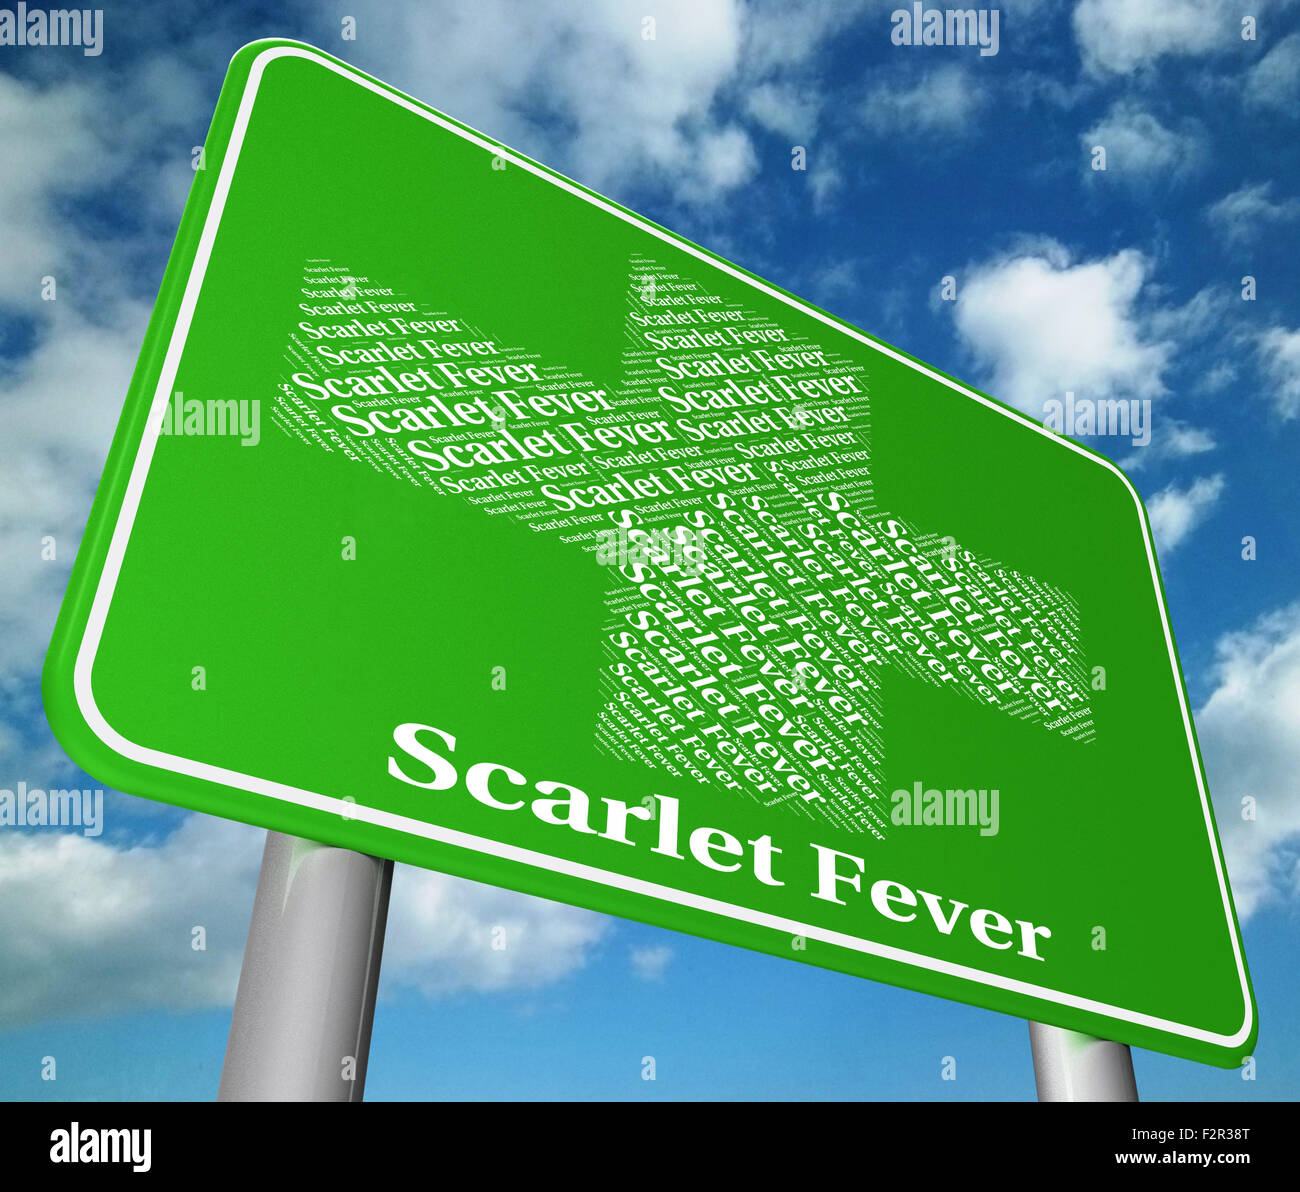 Scarlet Fever Meaning Ill Health And Infect Stock Photo